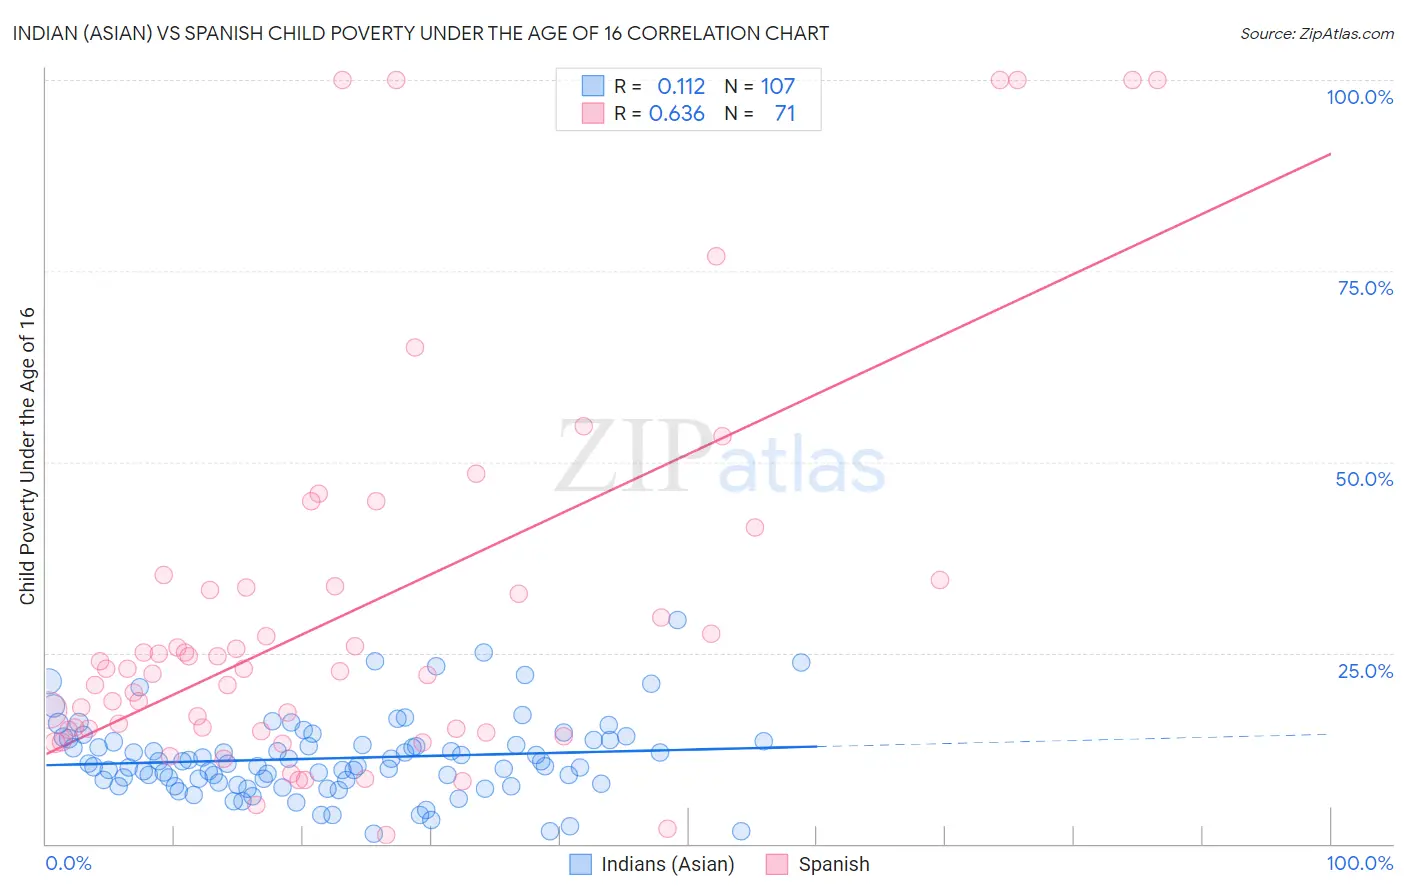 Indian (Asian) vs Spanish Child Poverty Under the Age of 16